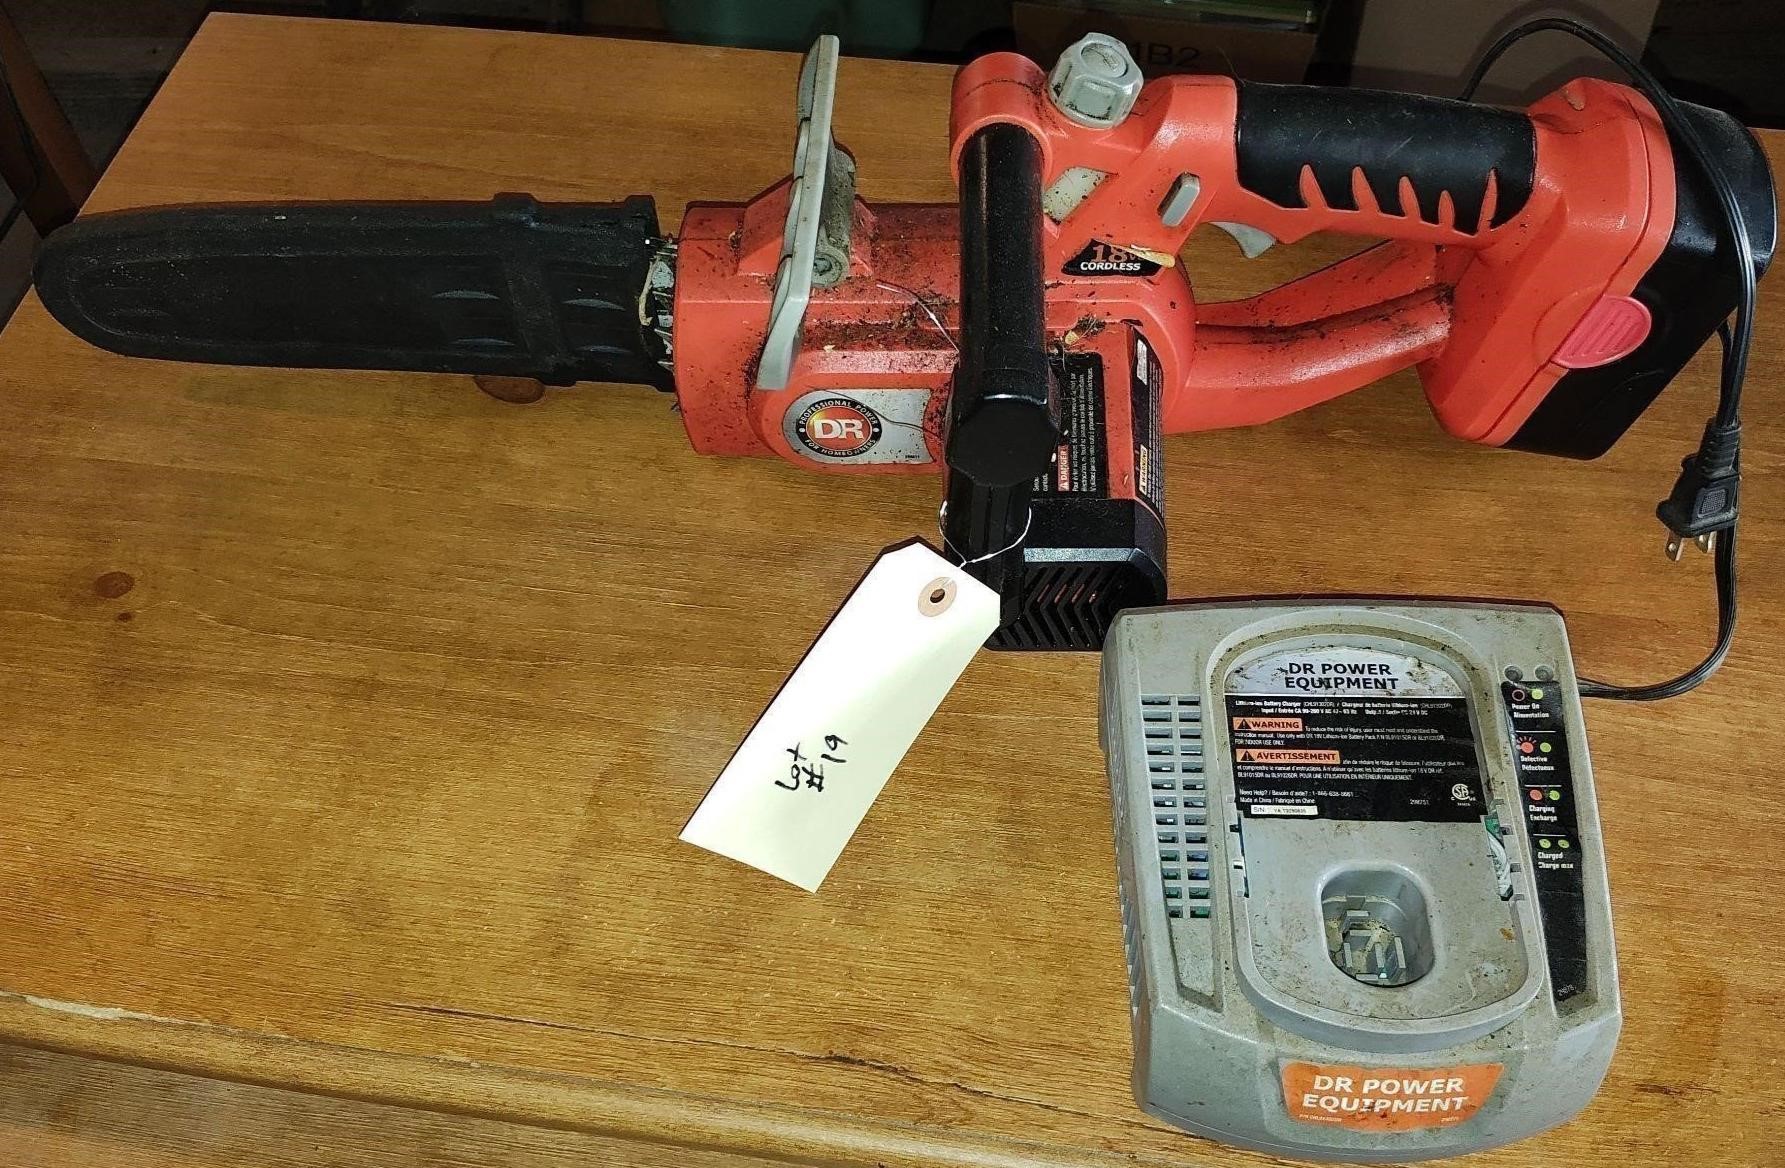 Battery operated Chain saw.